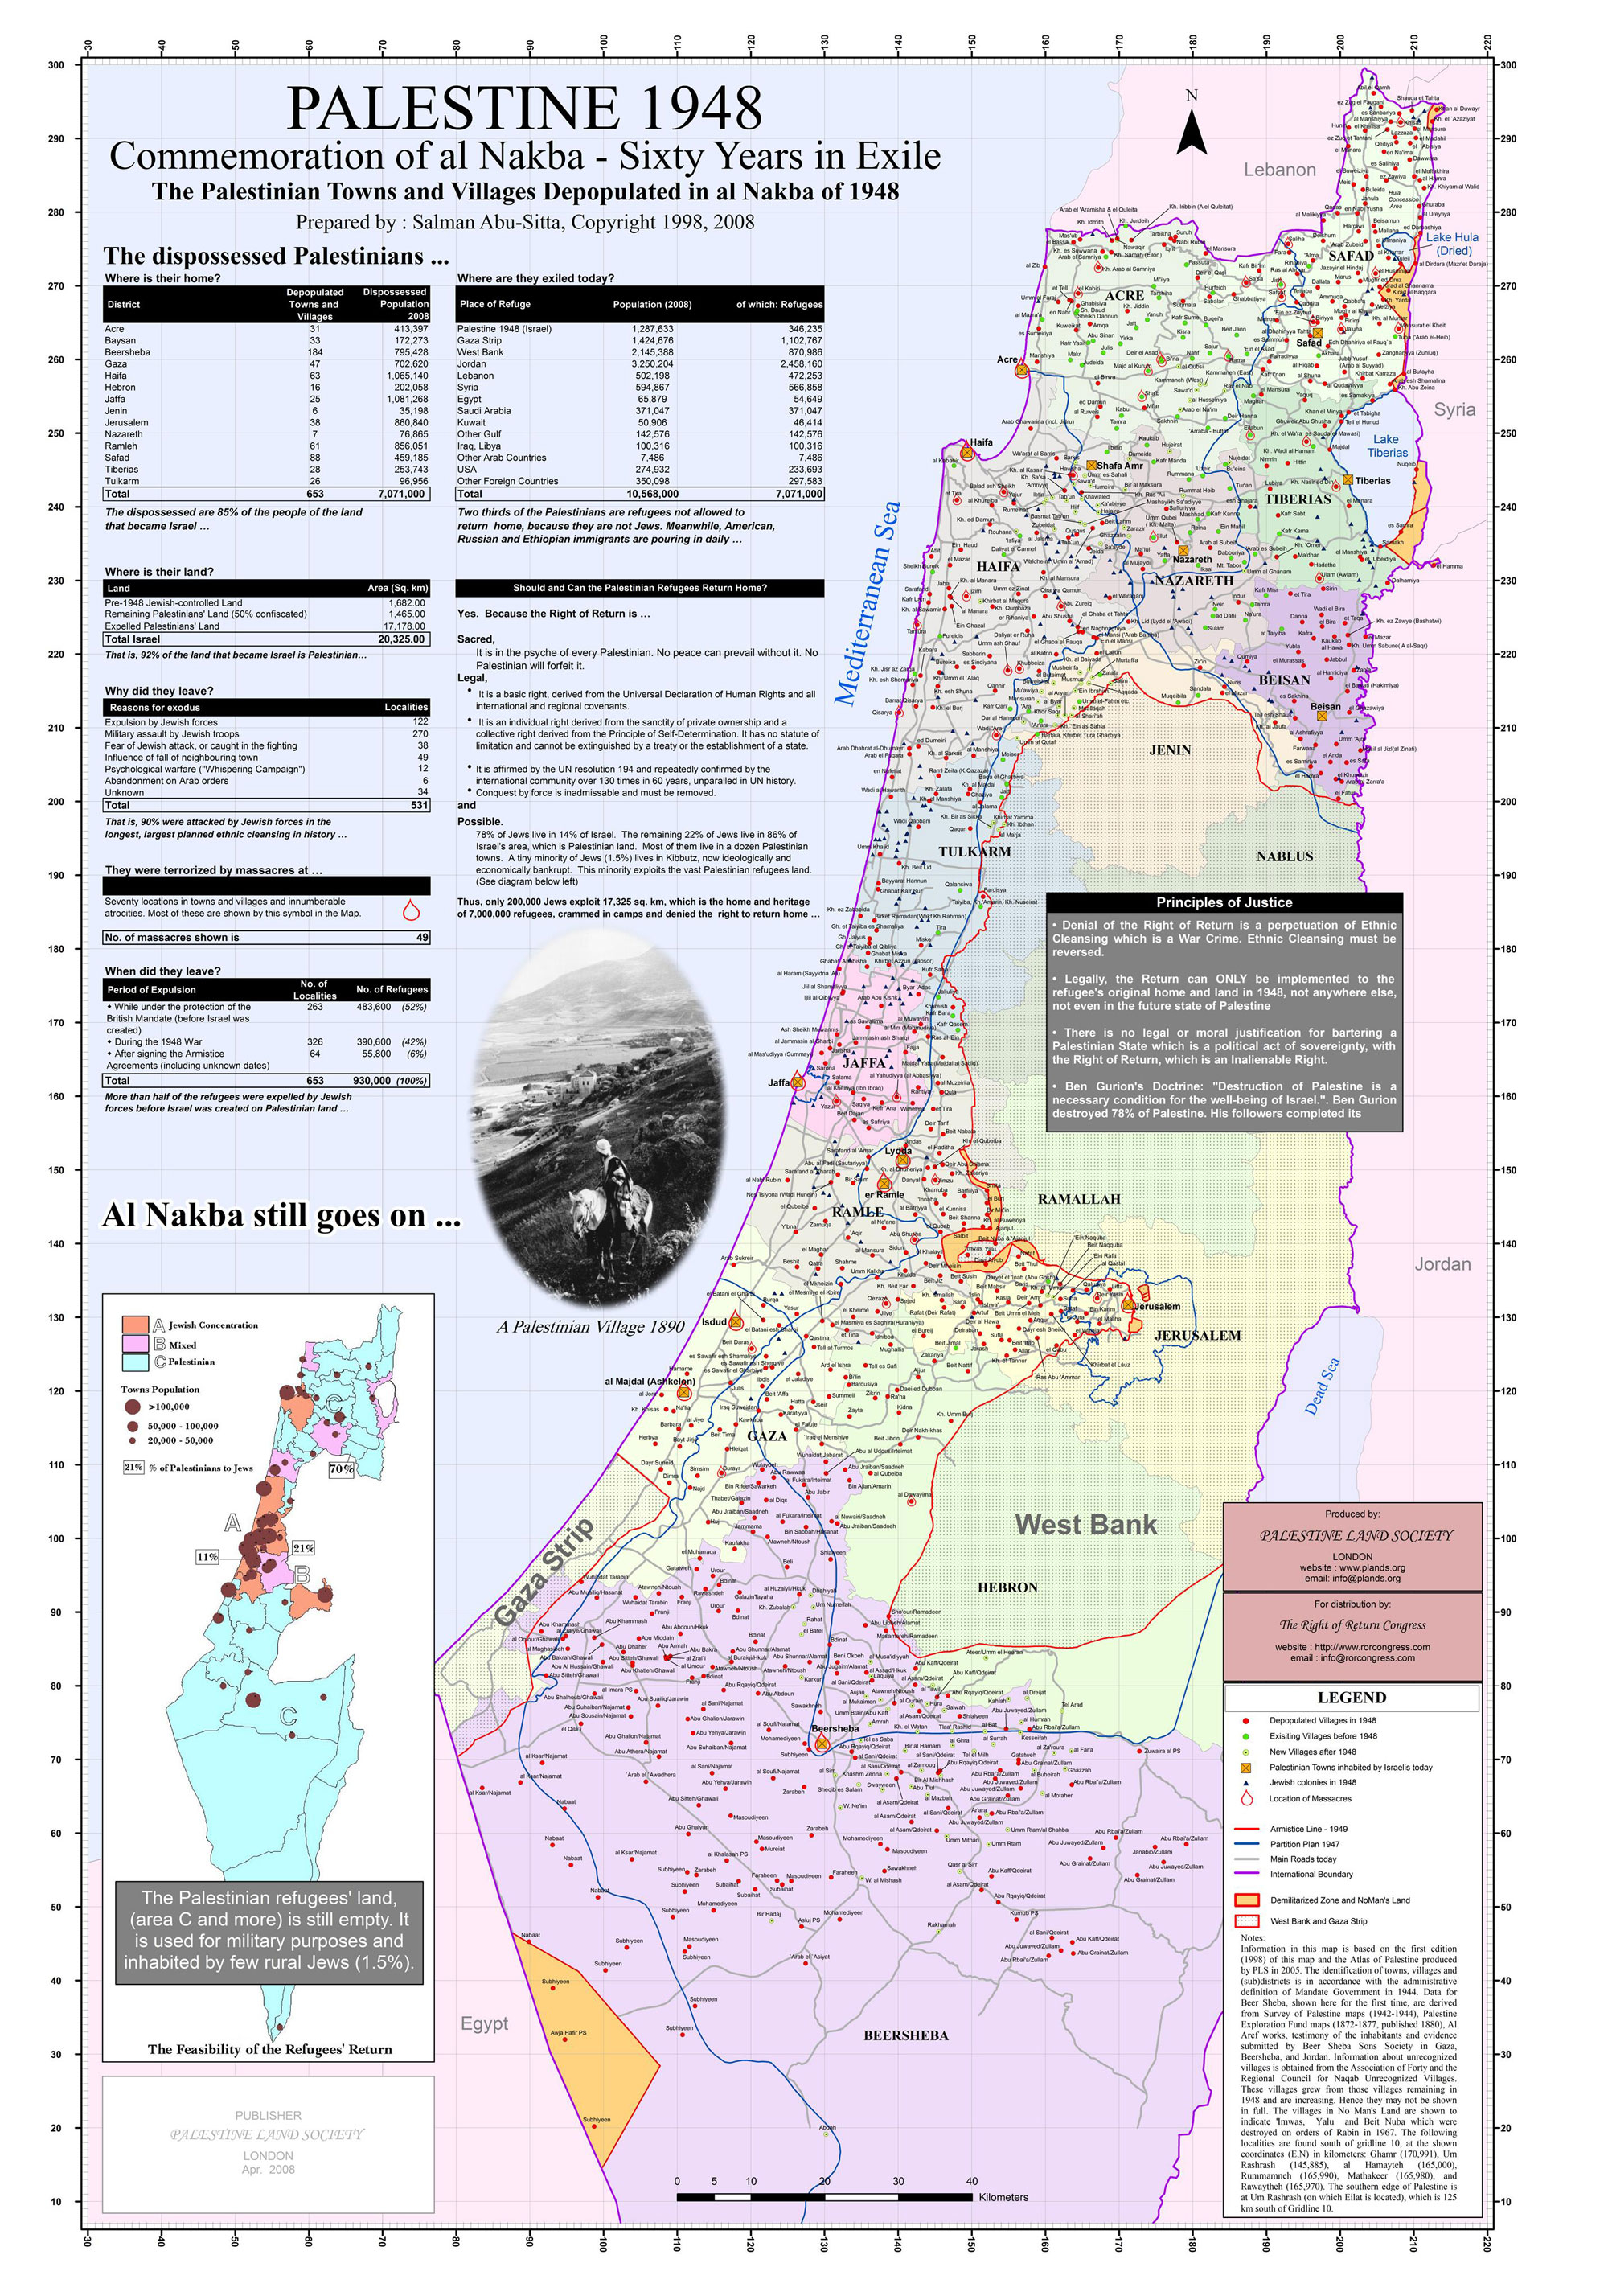 In commemoration of 60 years in exile, Abu Sitta mapped the dispossession of Palestinians and the depopulation of their villages during the ethnic cleansing of 1948. The map was produced in 1998. (Salman Abu Sitta/Palestine Land Society). 